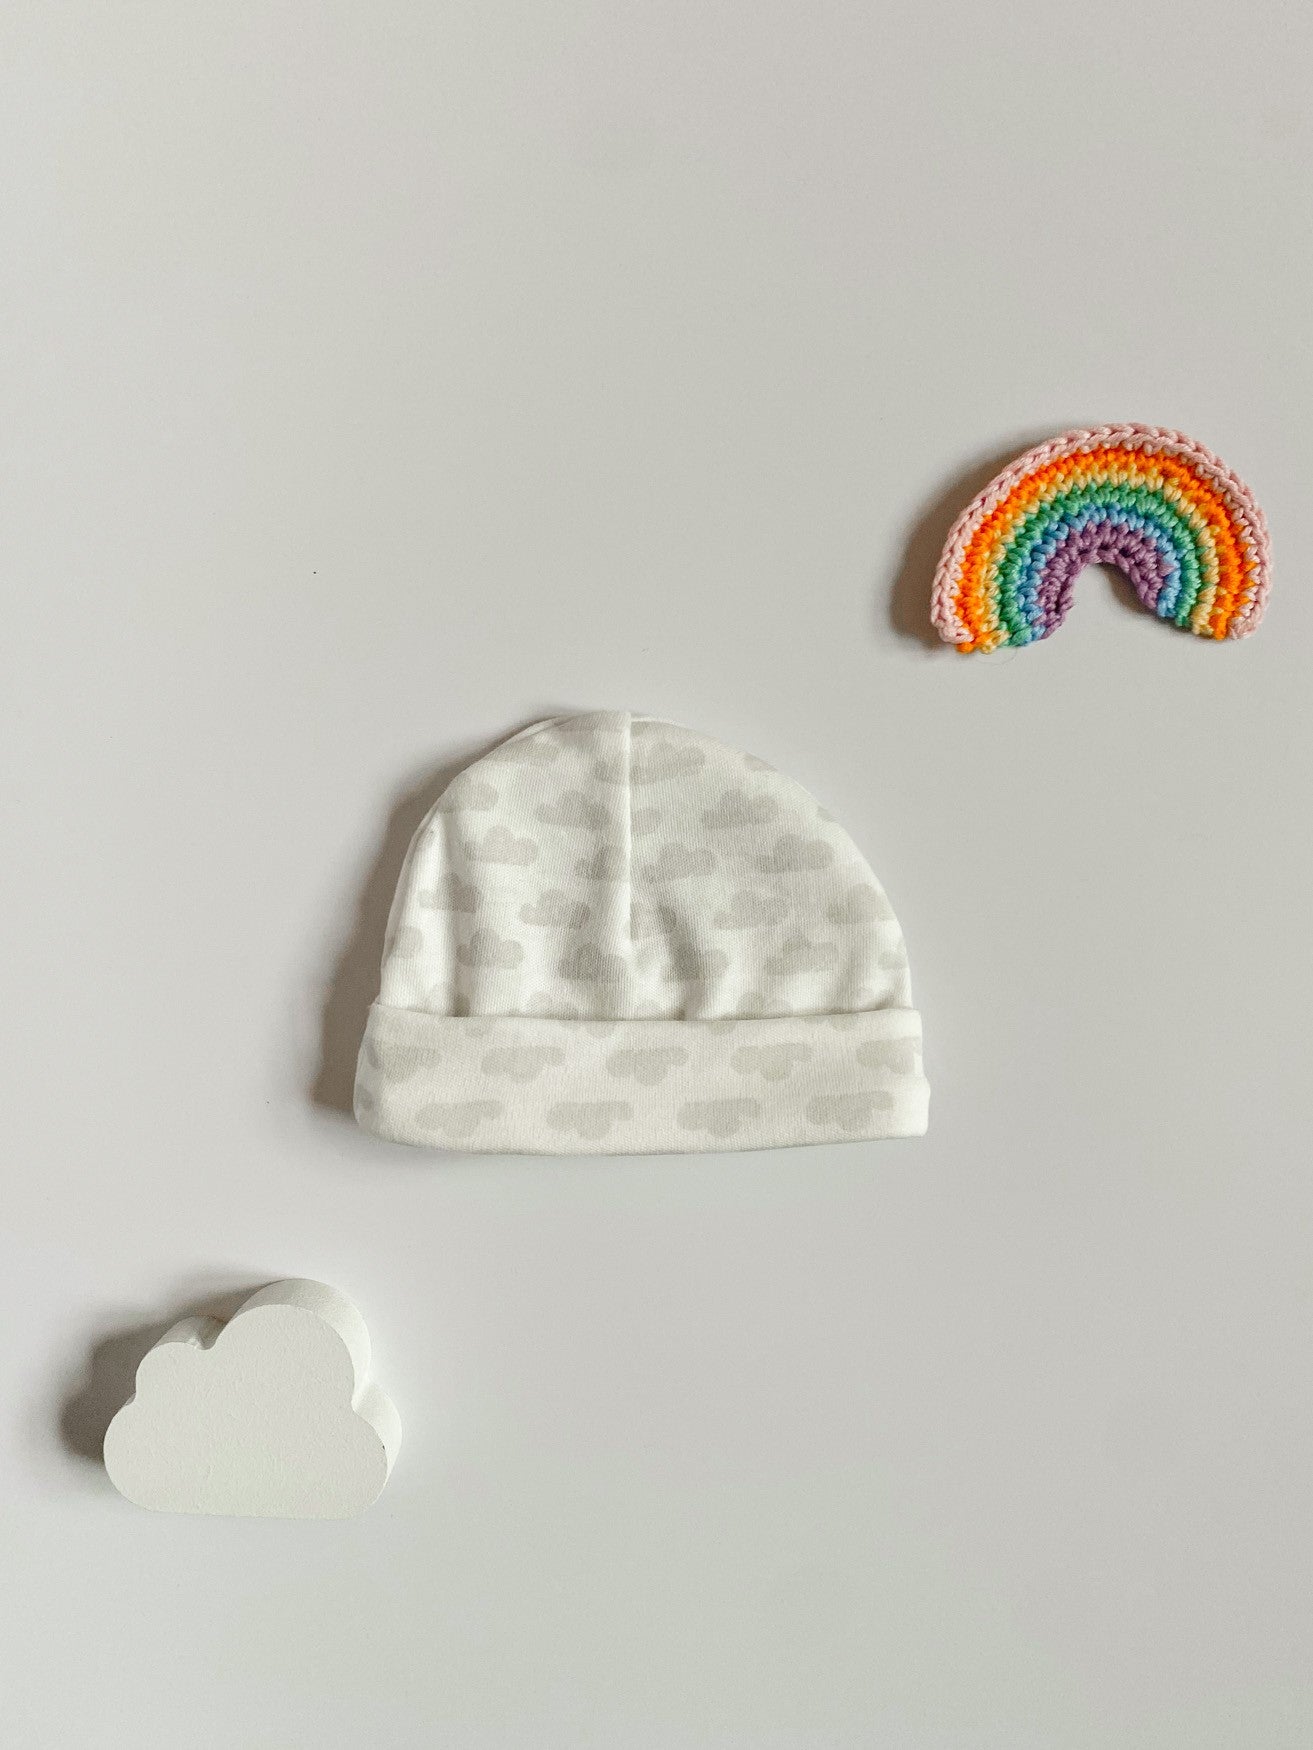 Tiny baby Round Hat, Silver Clouds, Premium 100% Organic Cotton - Hat - Tiny & Small